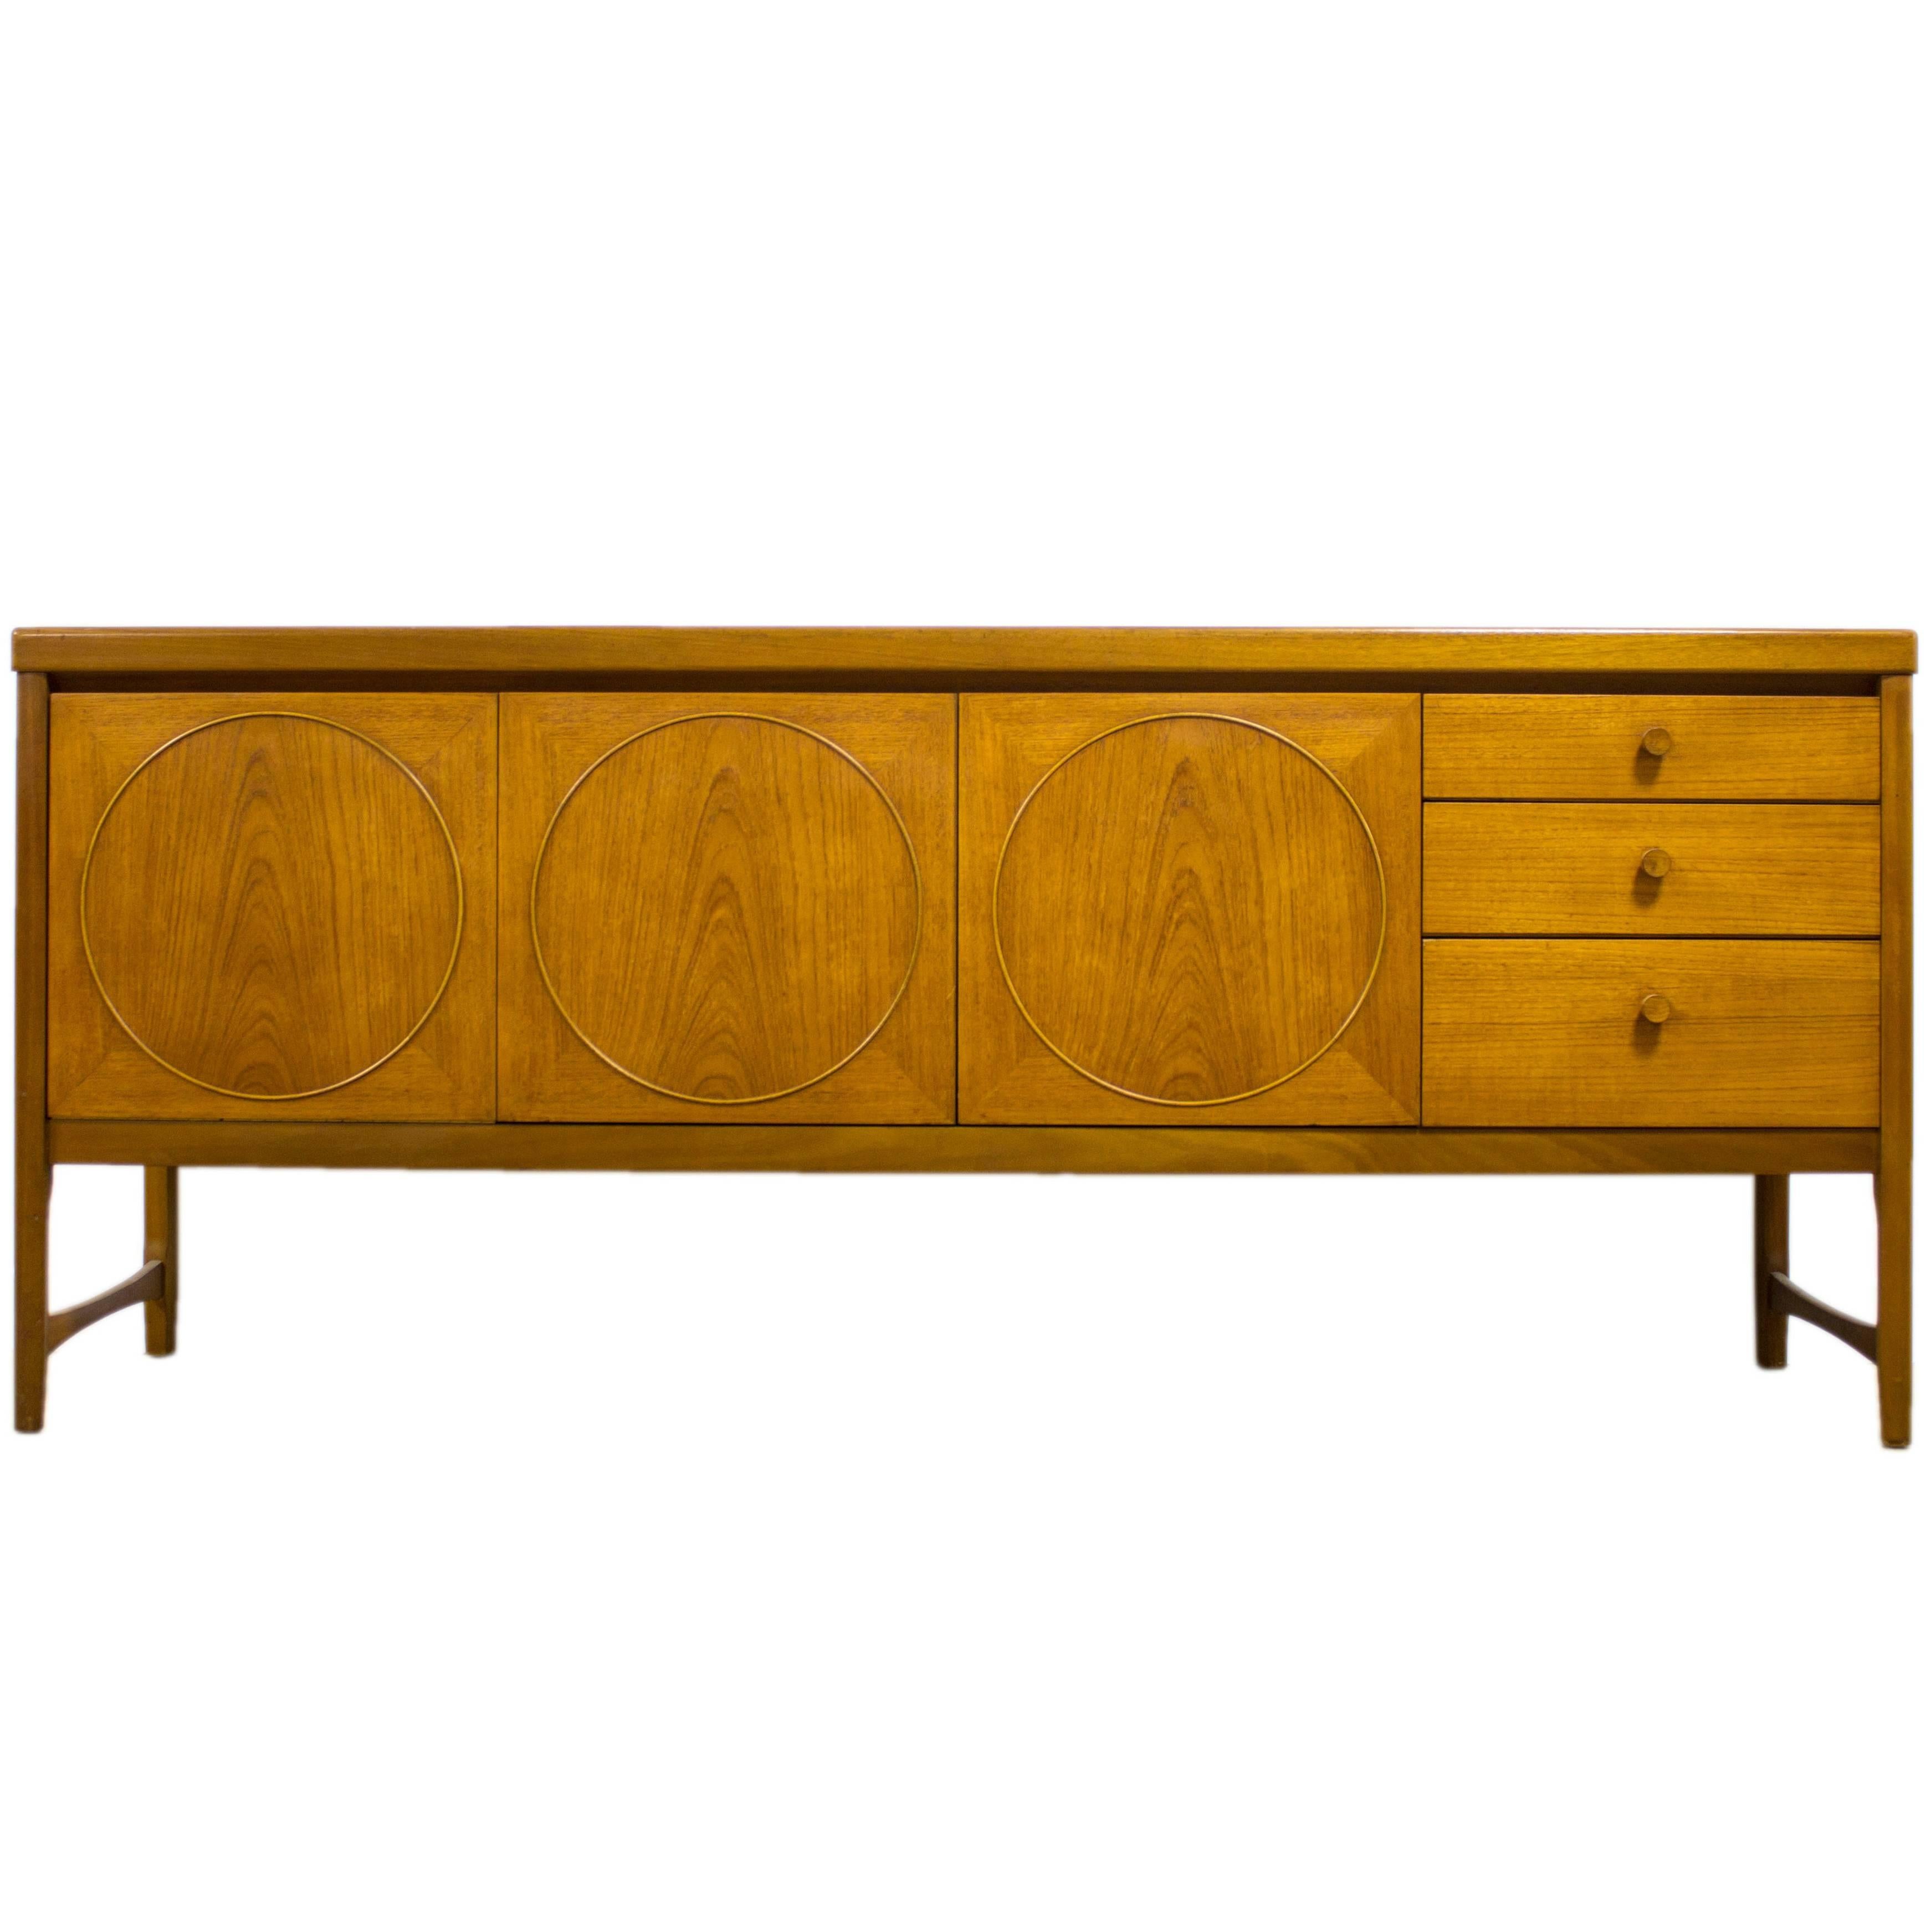 Nathan Circles Teak Mid-Century Sideboard For Sale